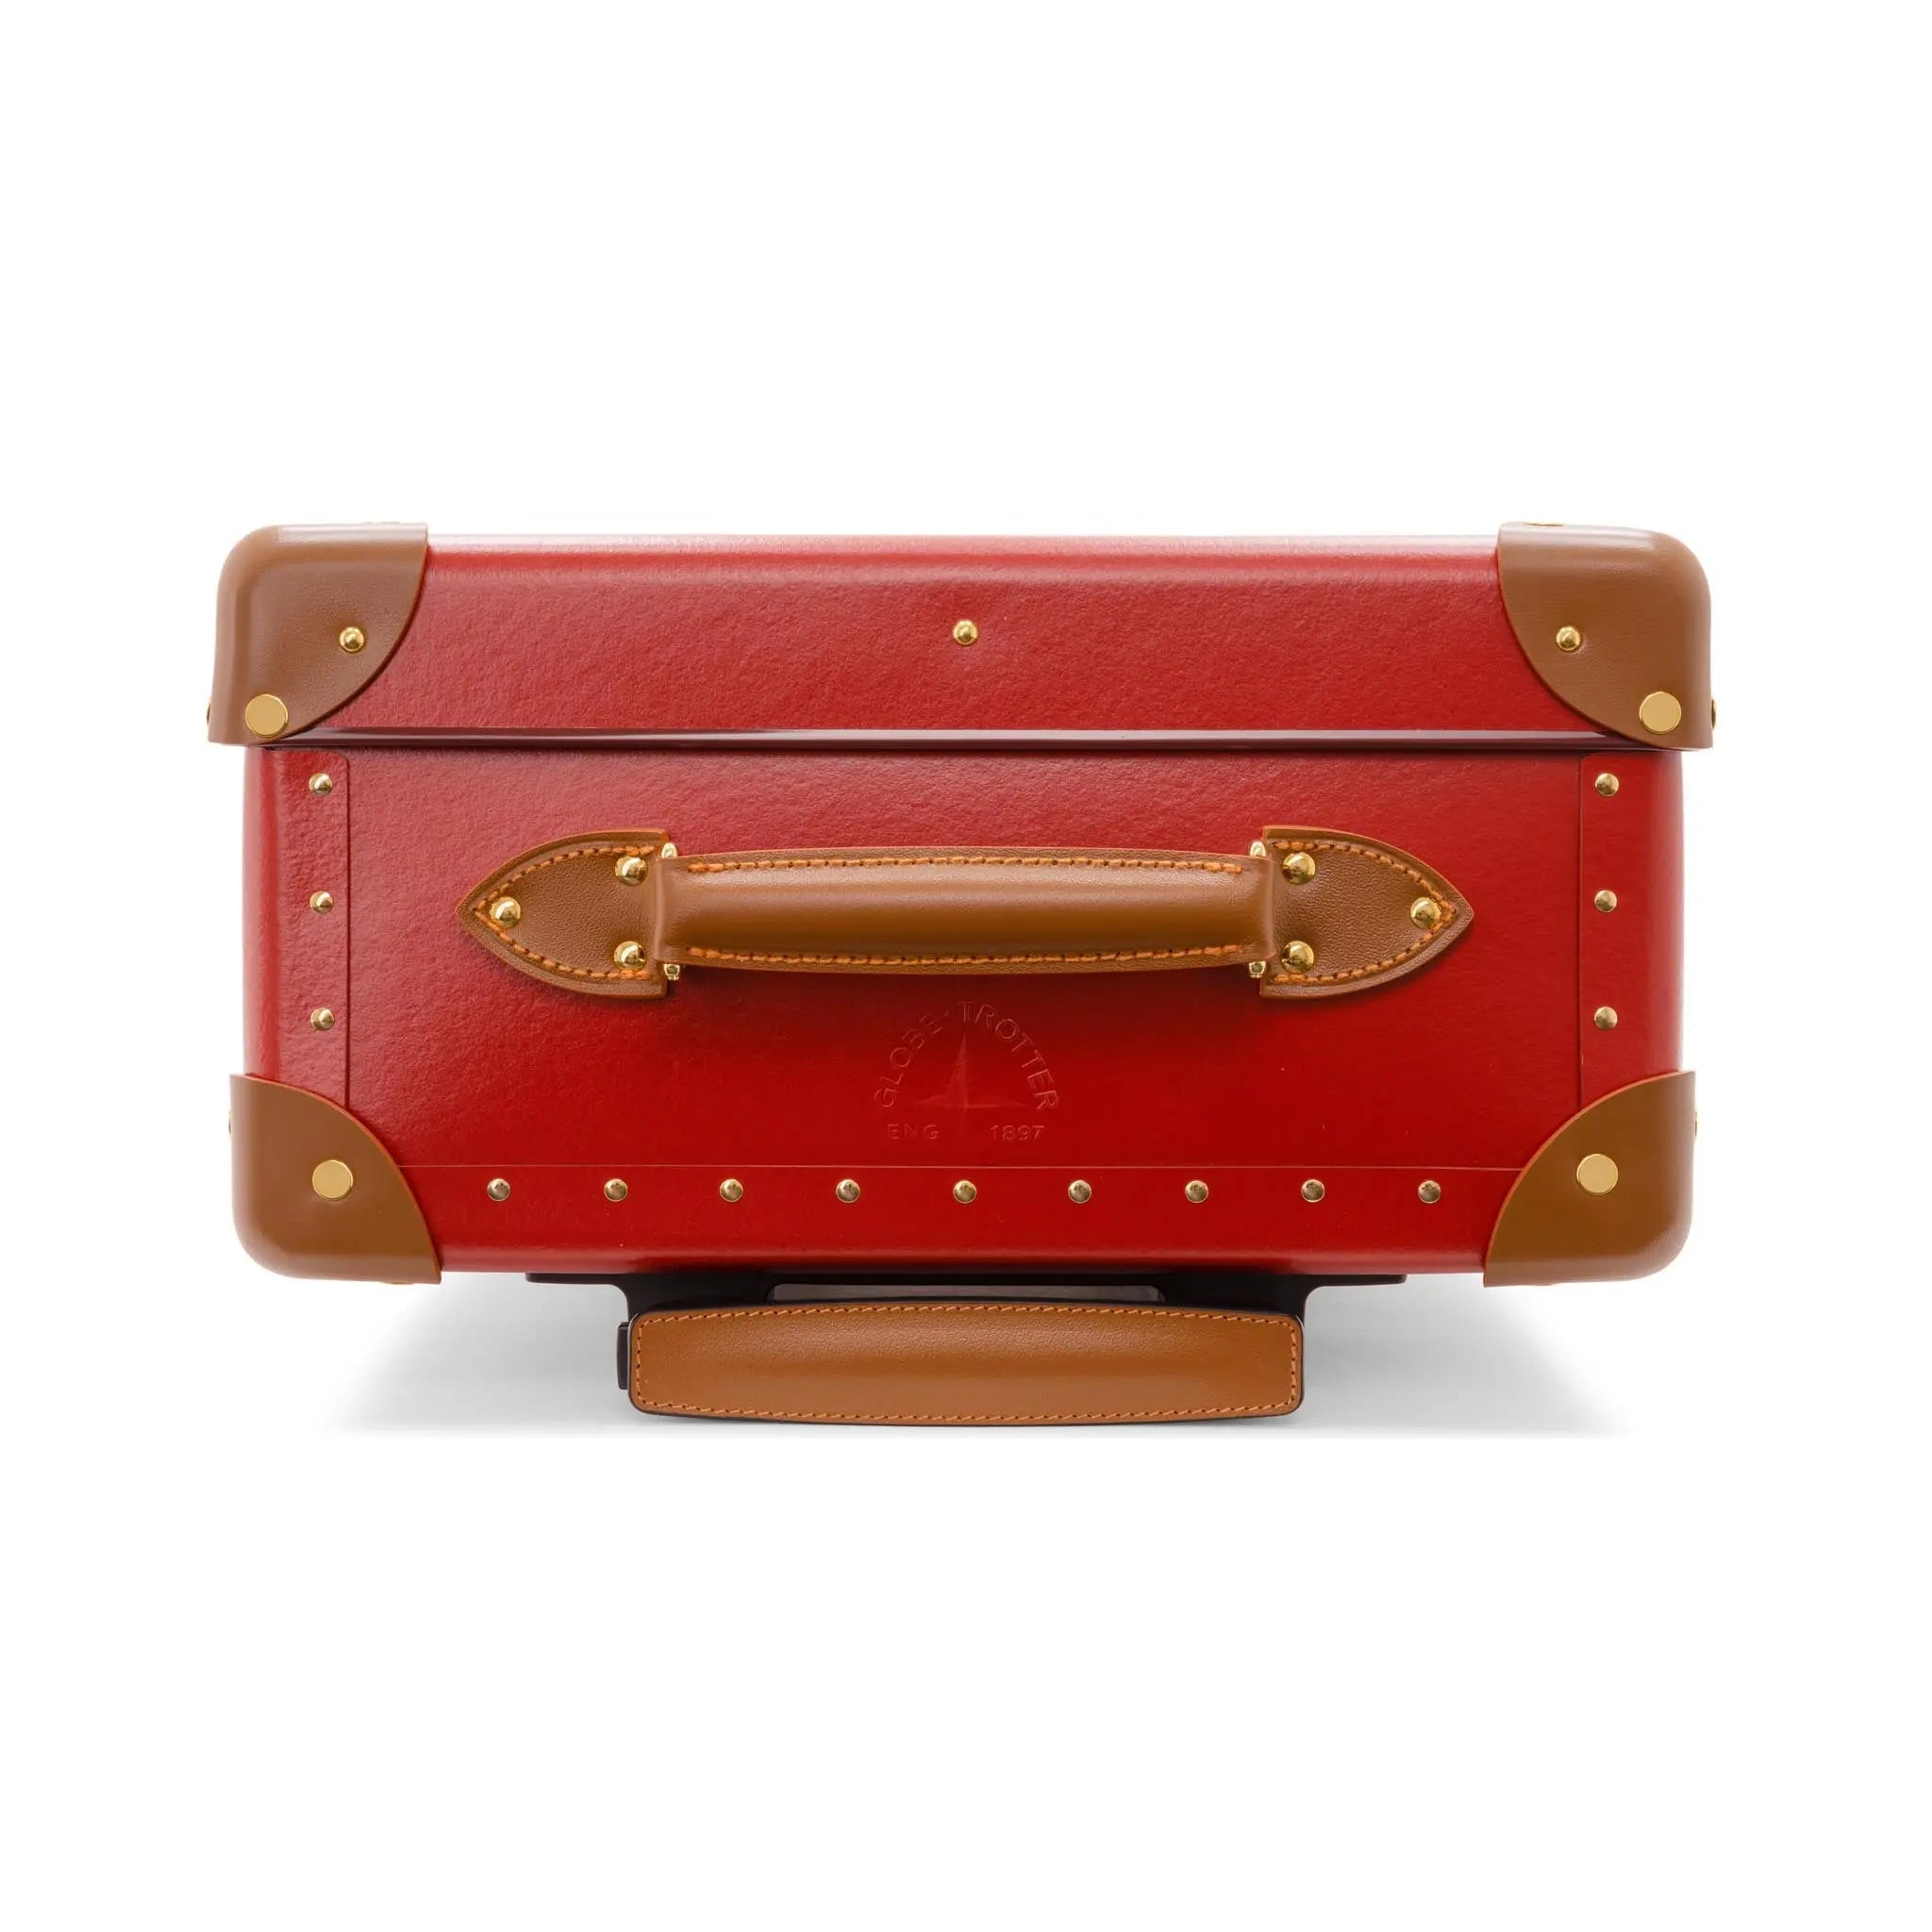 Centenary · Small Carry-On - 2 Wheels | Red/Caramel/Gold - GLOBE-TROTTER